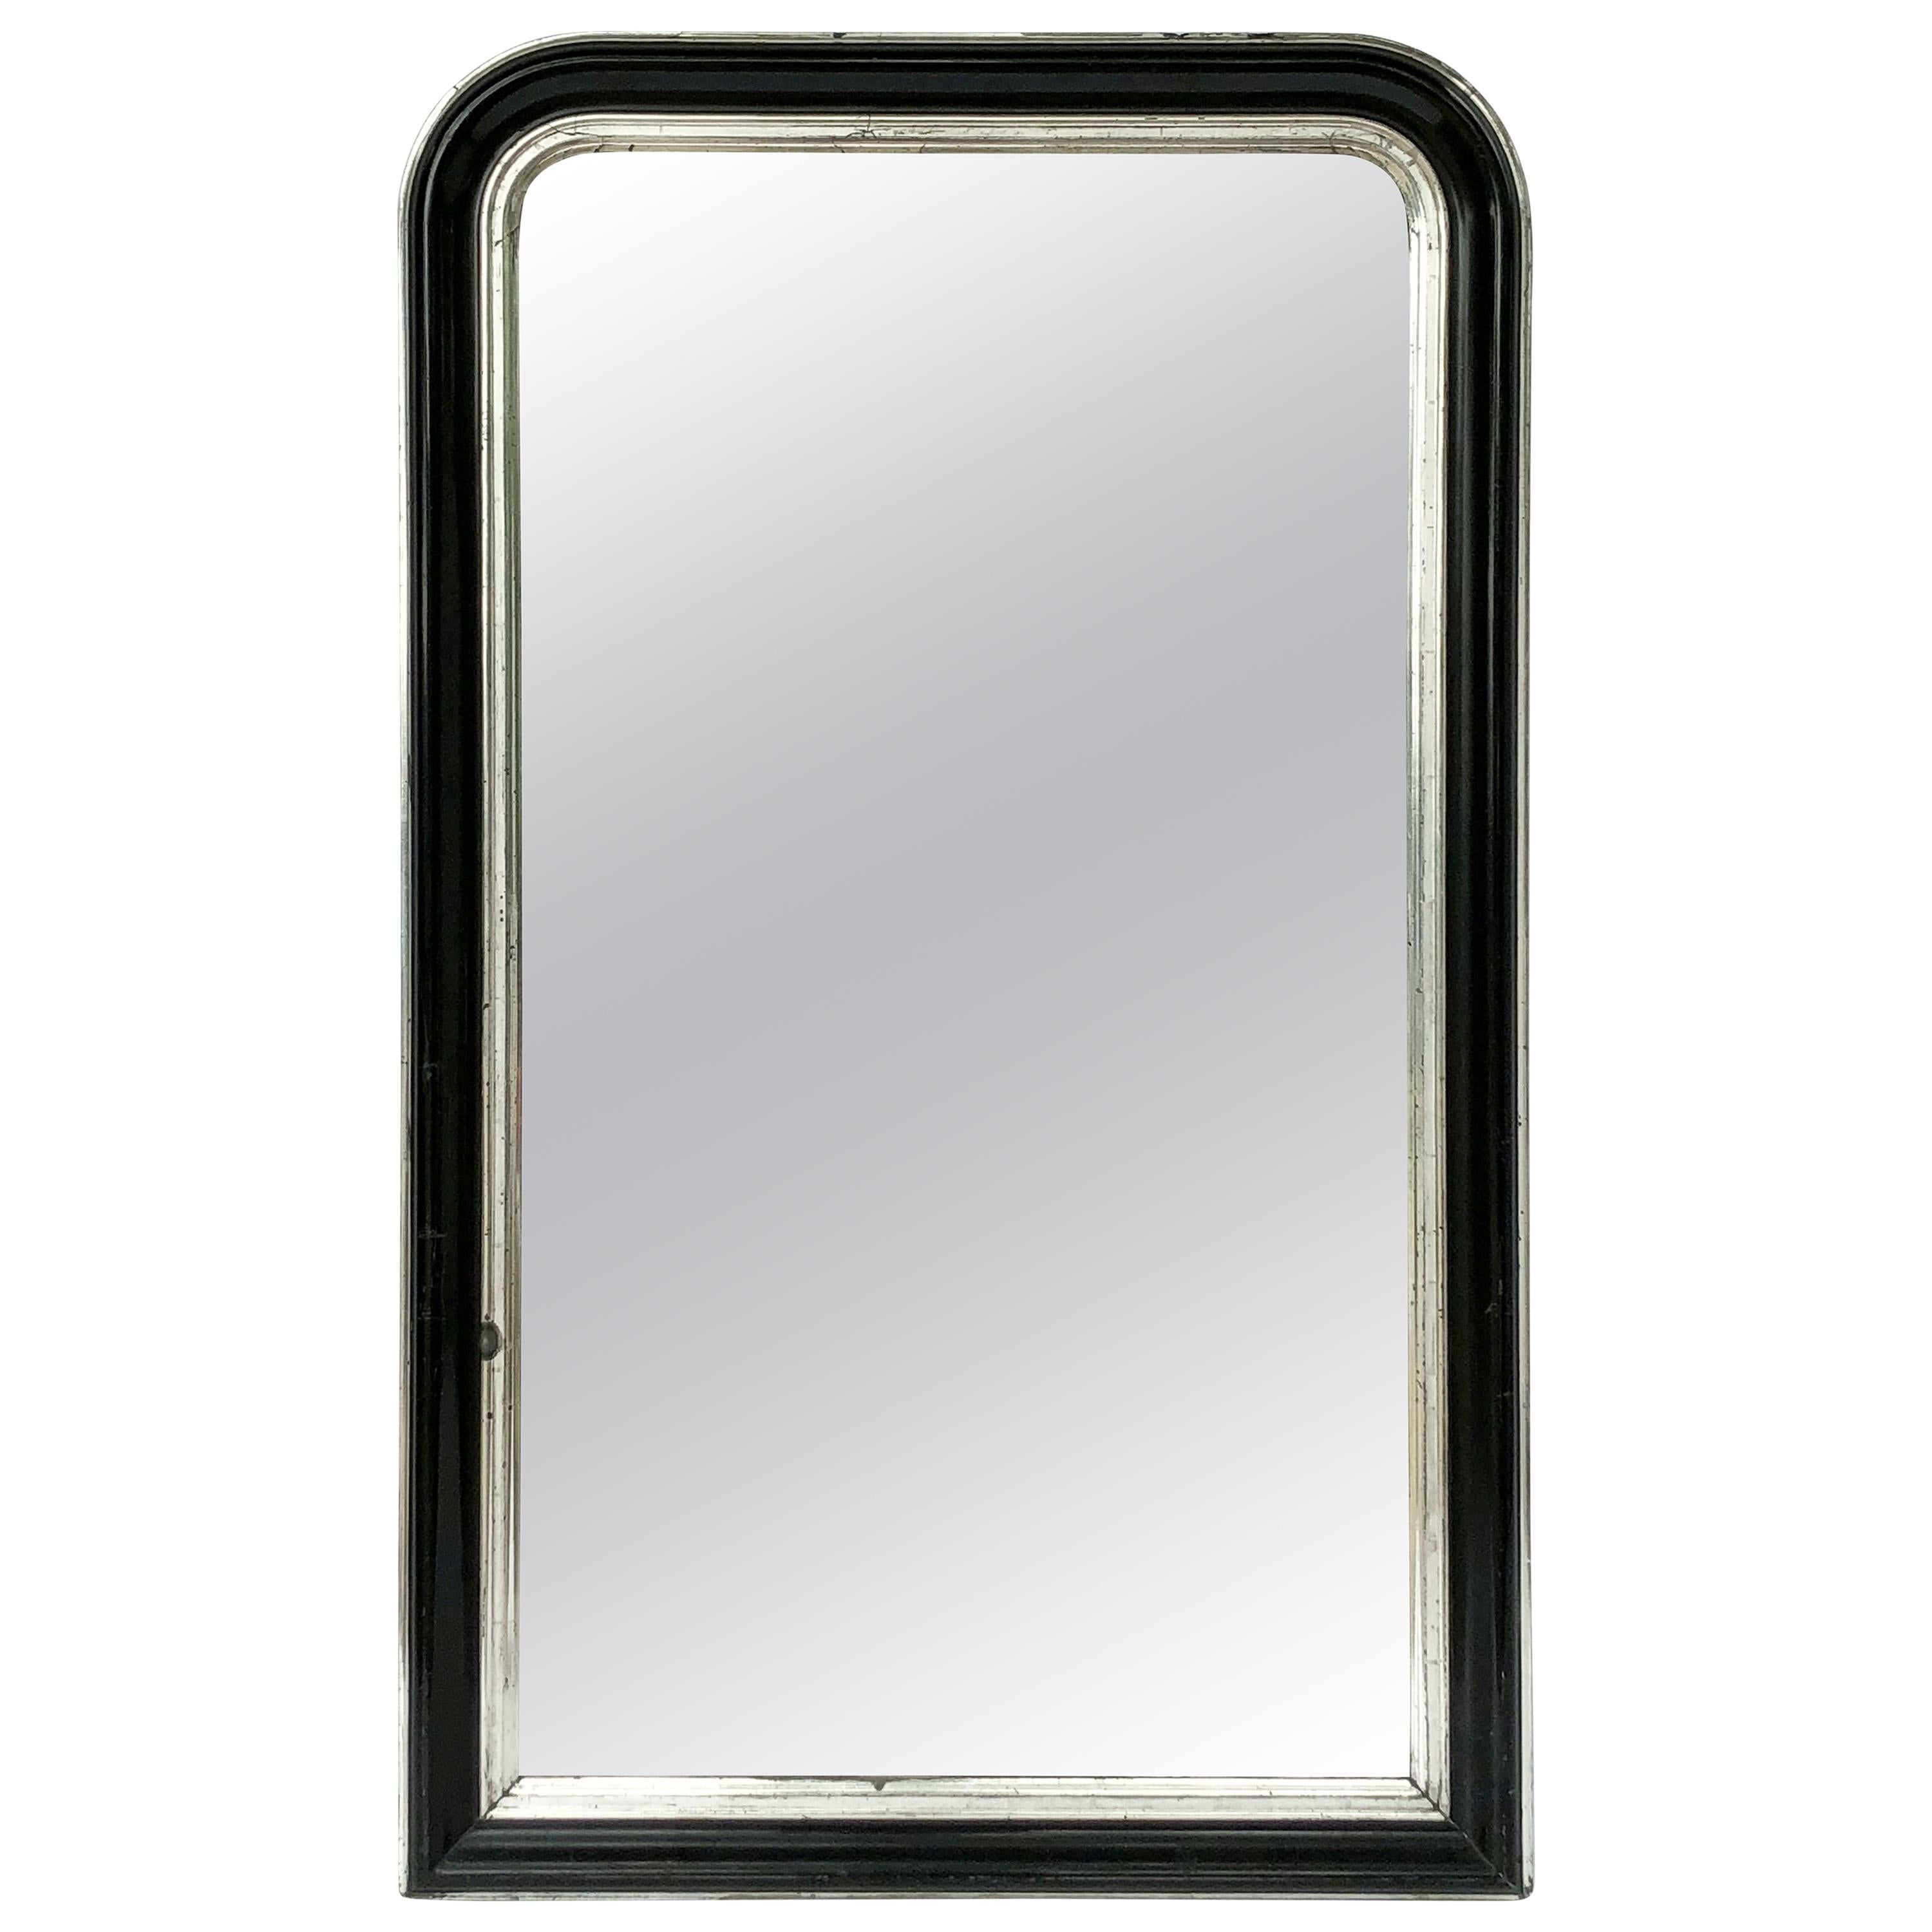 Napoleon III Period Black and Silver Mirror from France (H 53 1/2 x W 32 1/4) For Sale